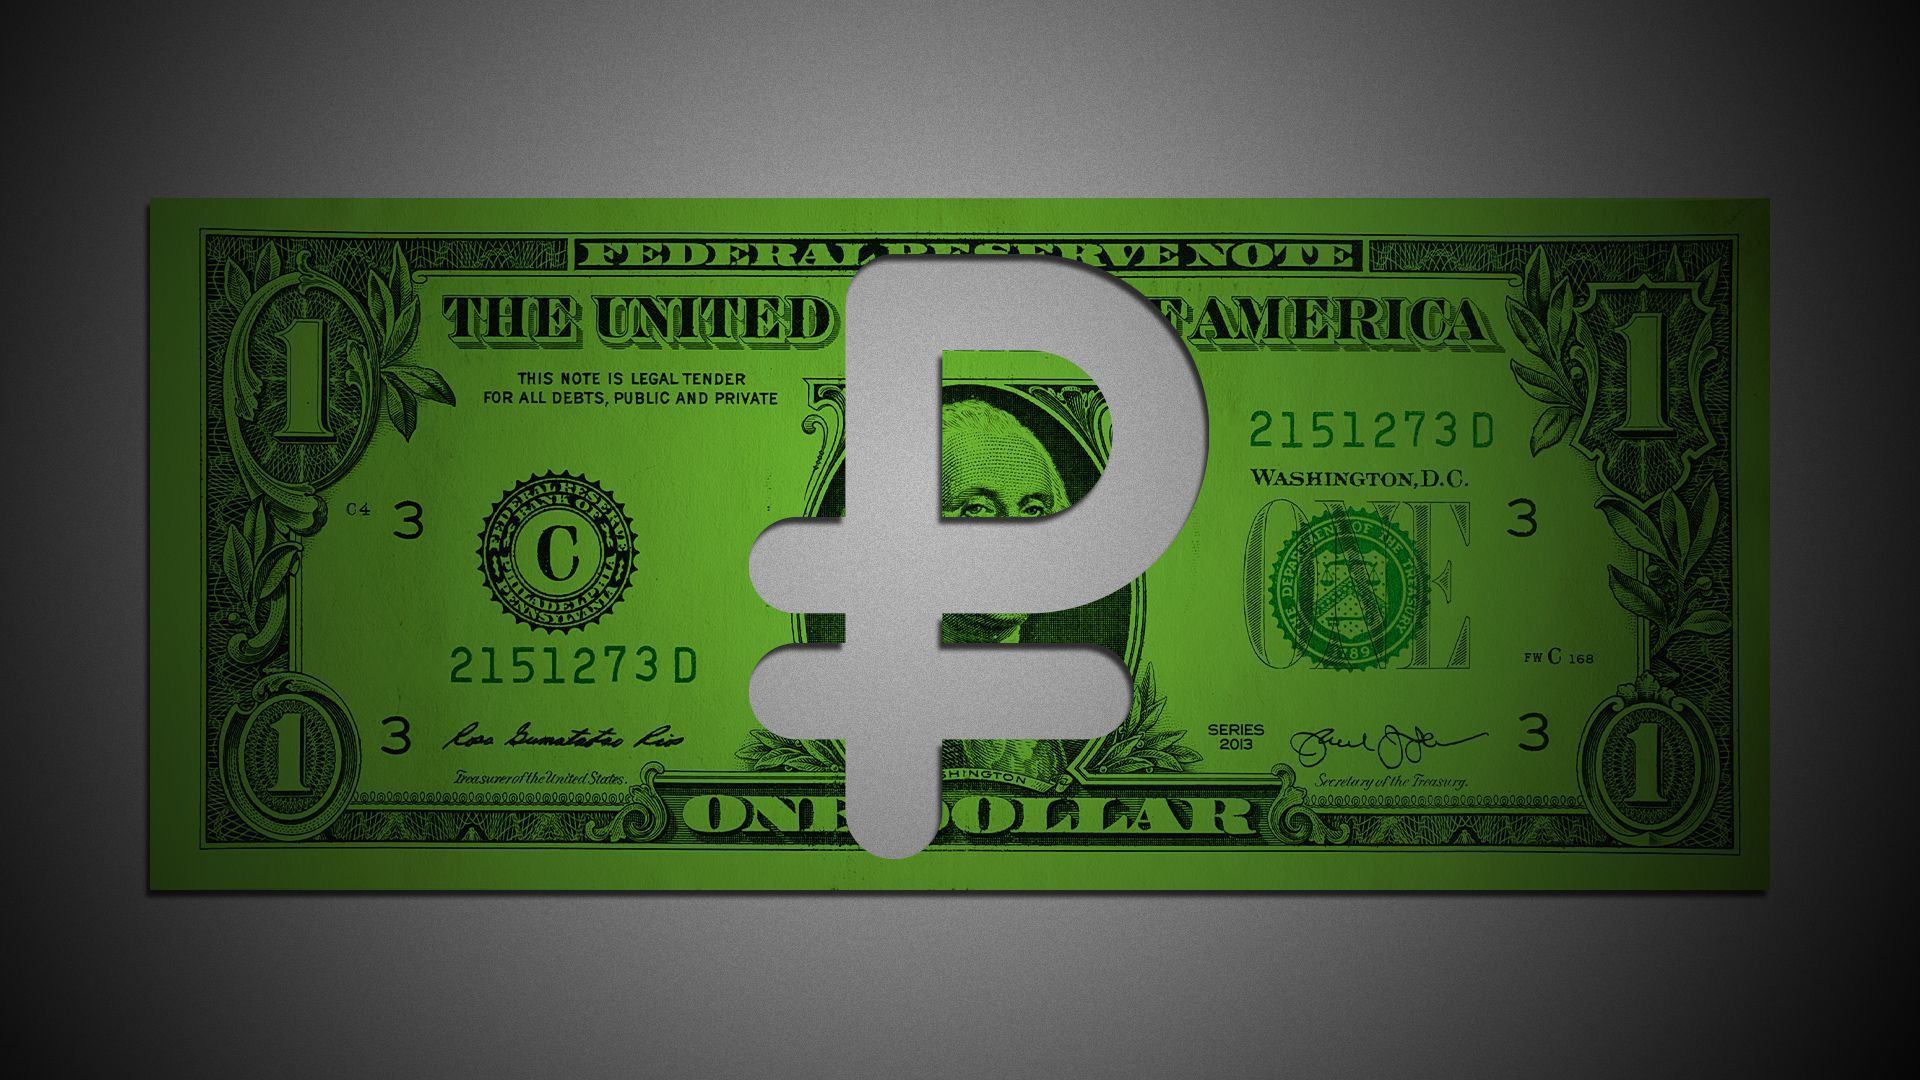 Illustration of a ruble symbol over a dollar